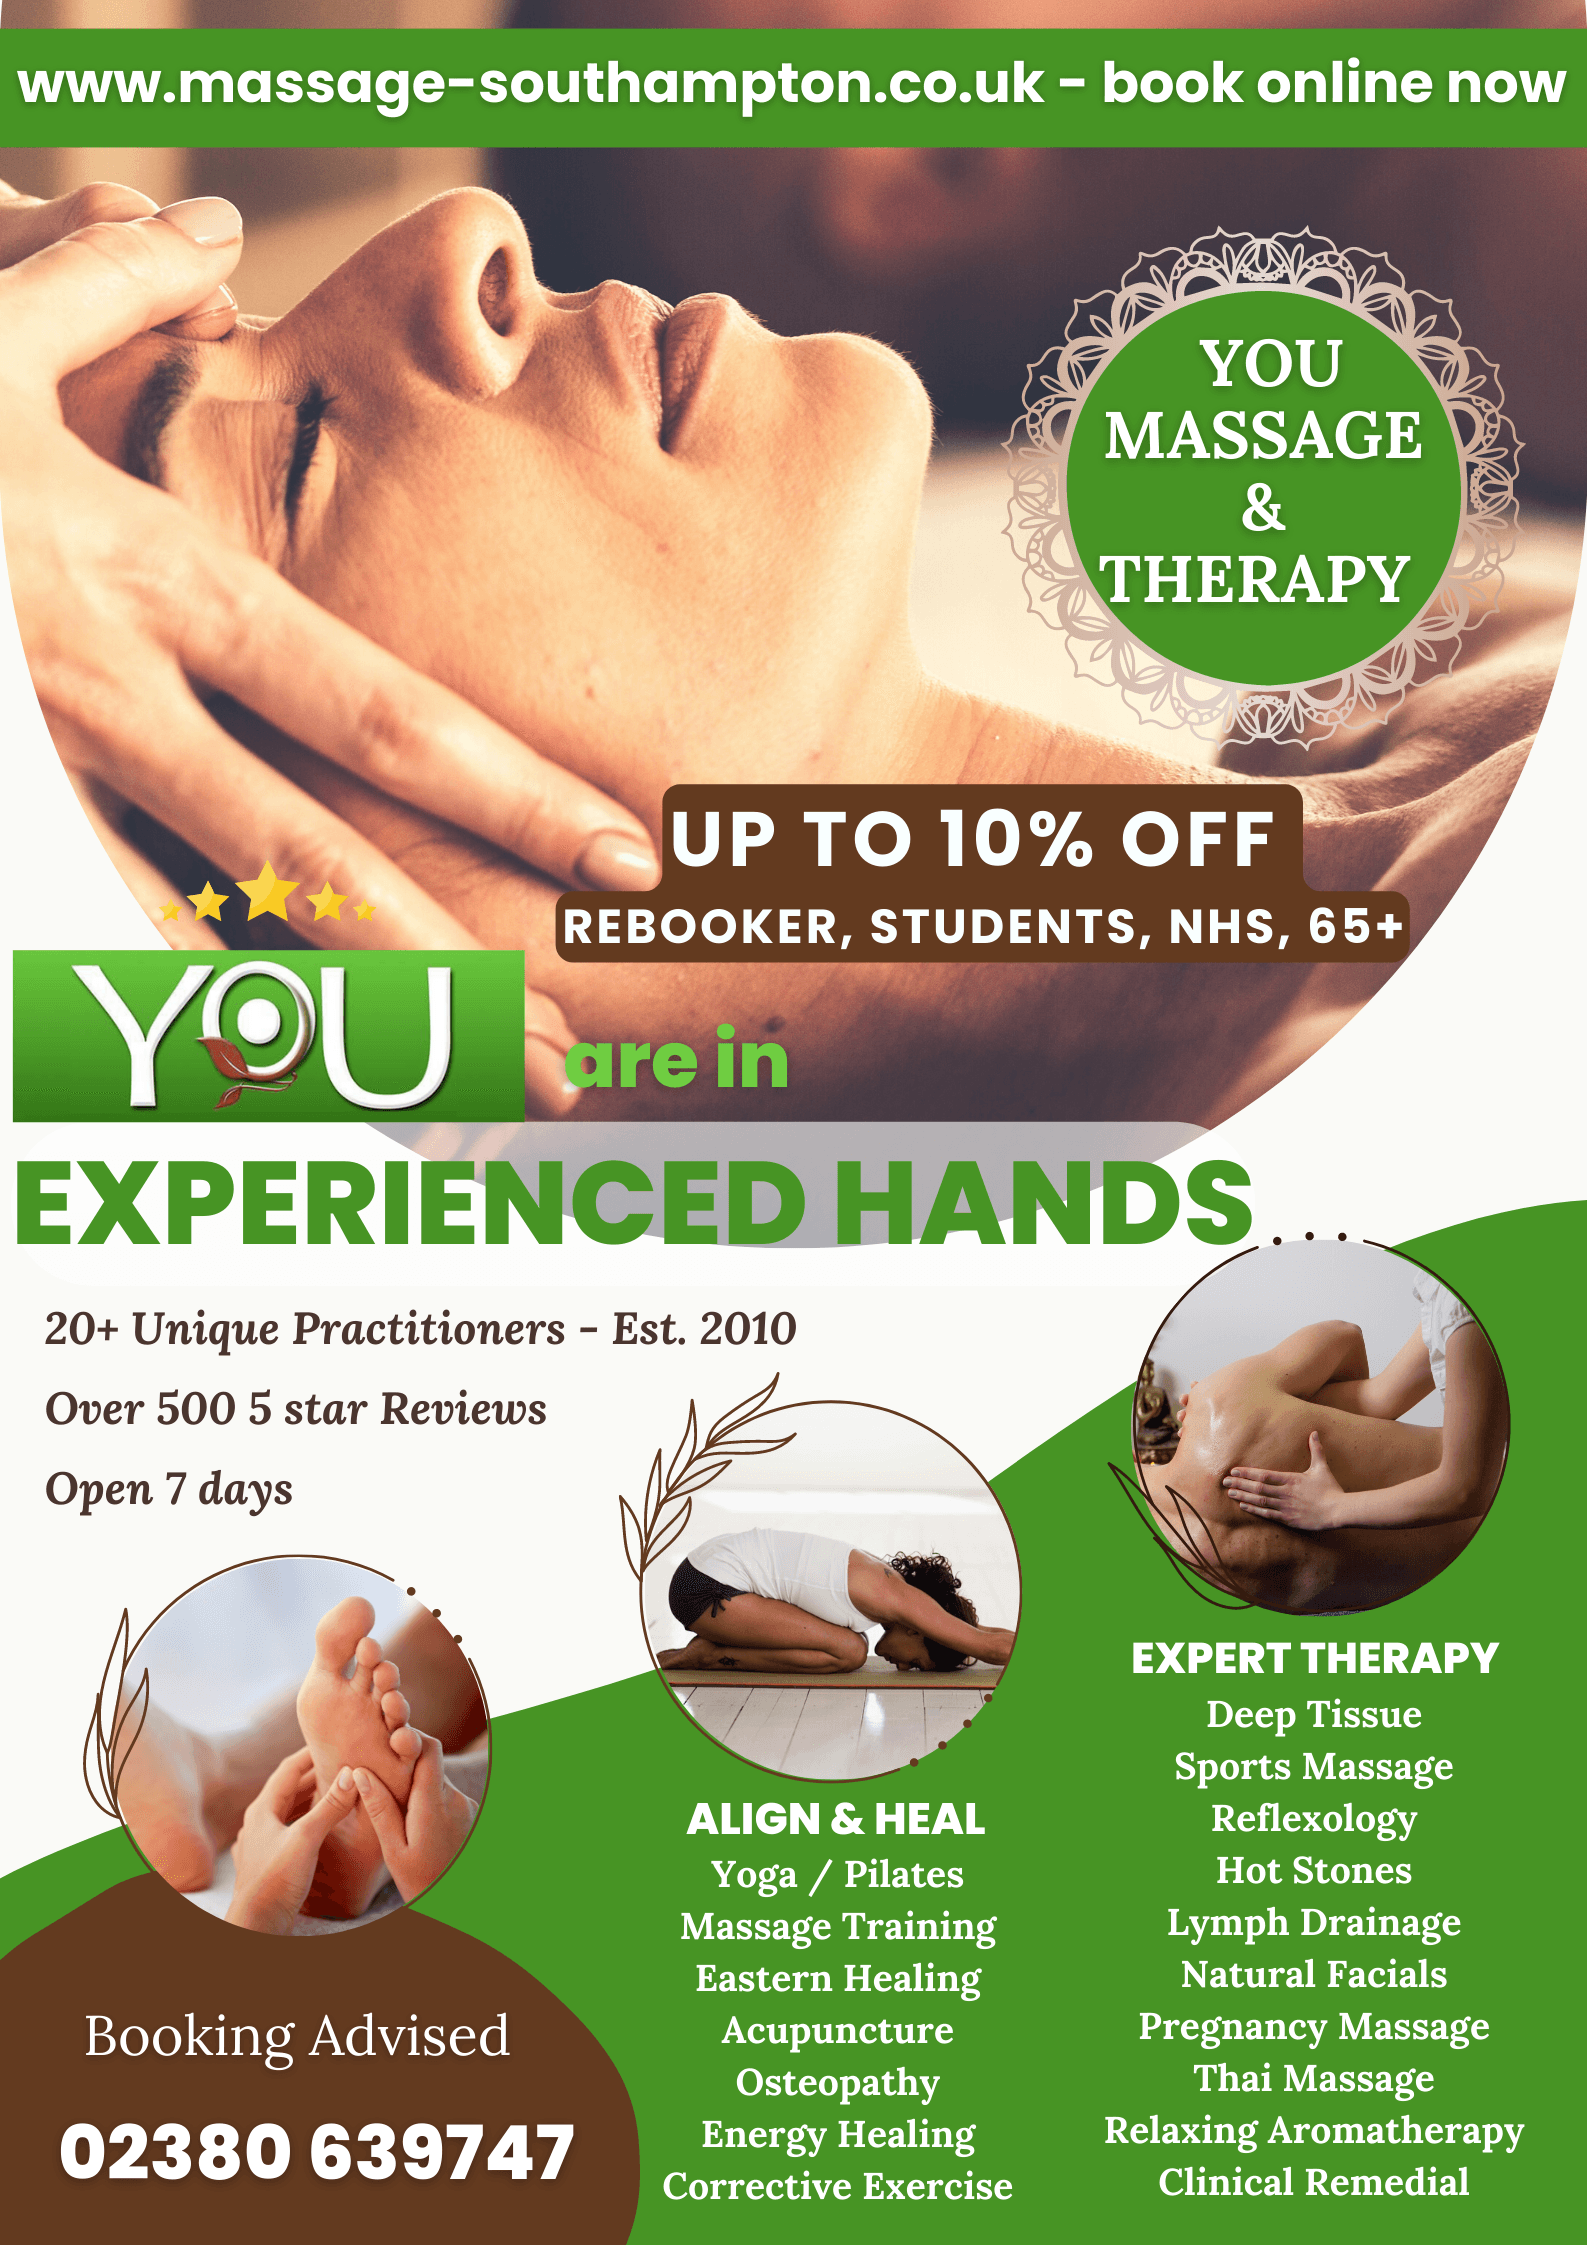 10% off any treatment at You Massage